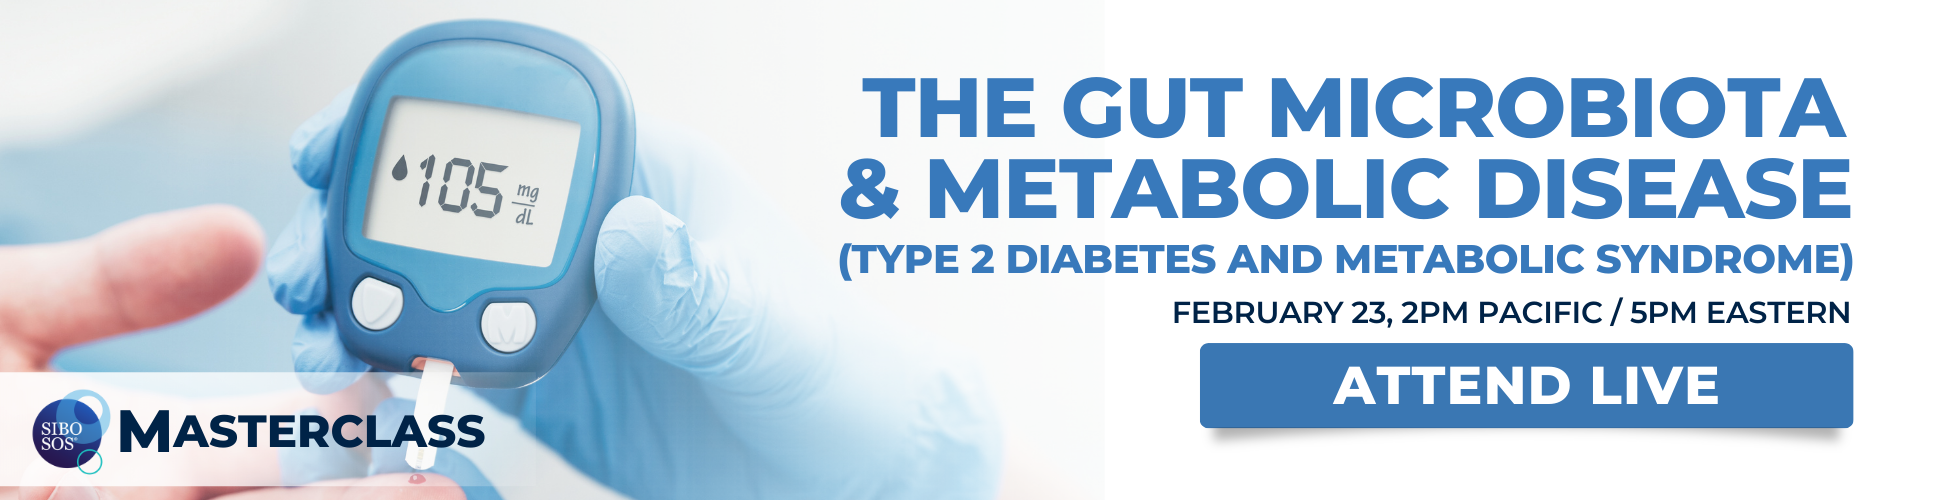 The Gut Microbiota and Metabolic Disease (Type 2 Diabetes and Metabolic Syndrome) with Dr. Jason Hawrelak